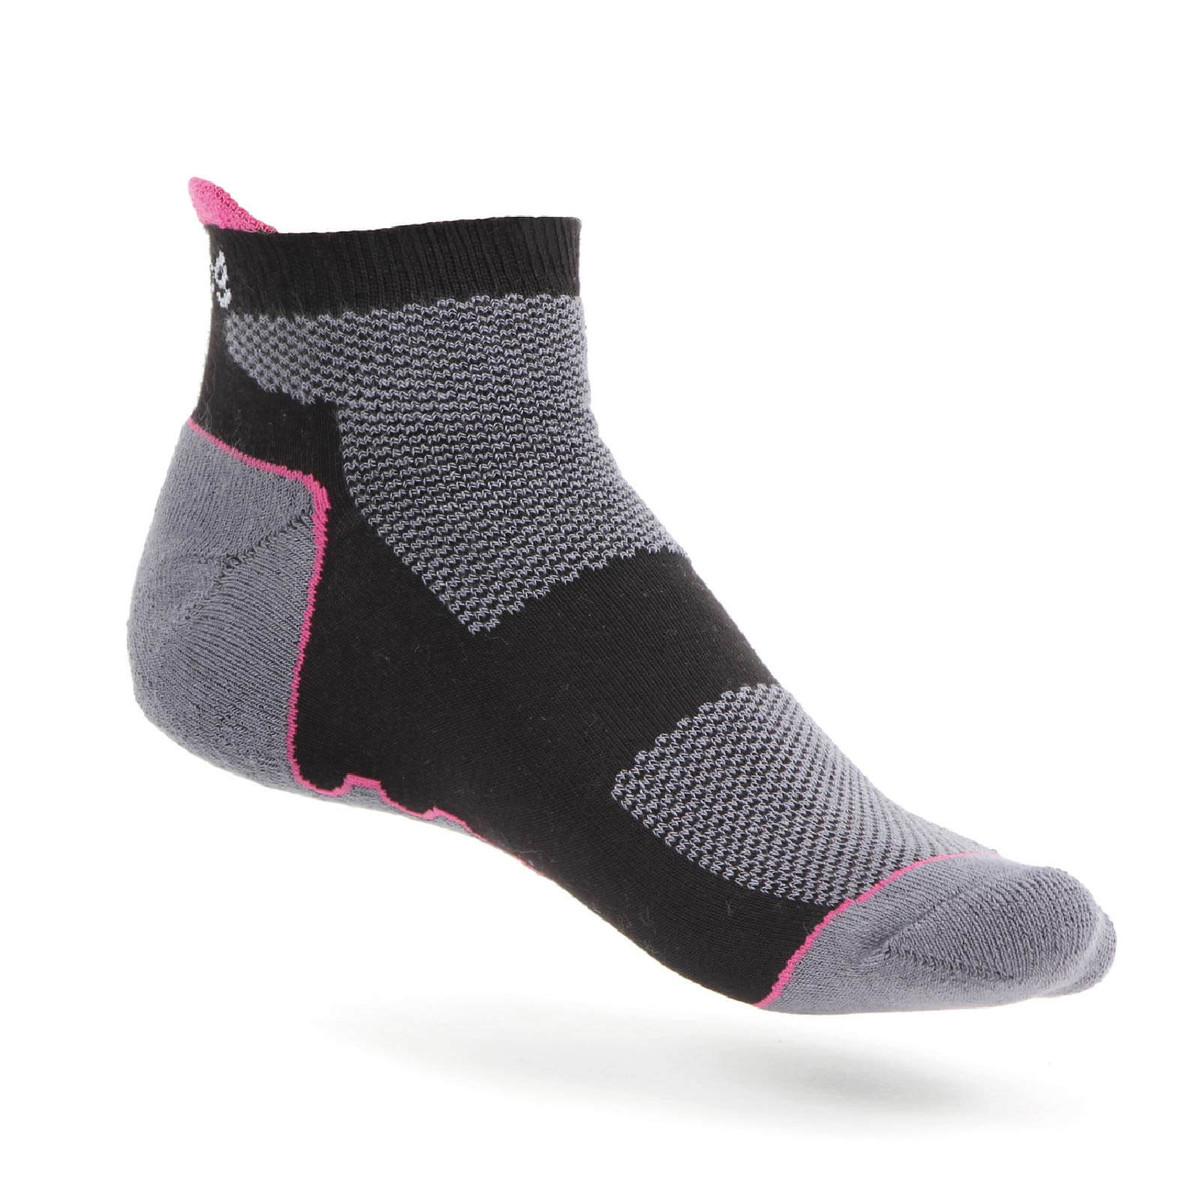 FlexiTog MALMO Womens Socks XS90 - A to Z Safety Centre | PPE | Uniforms